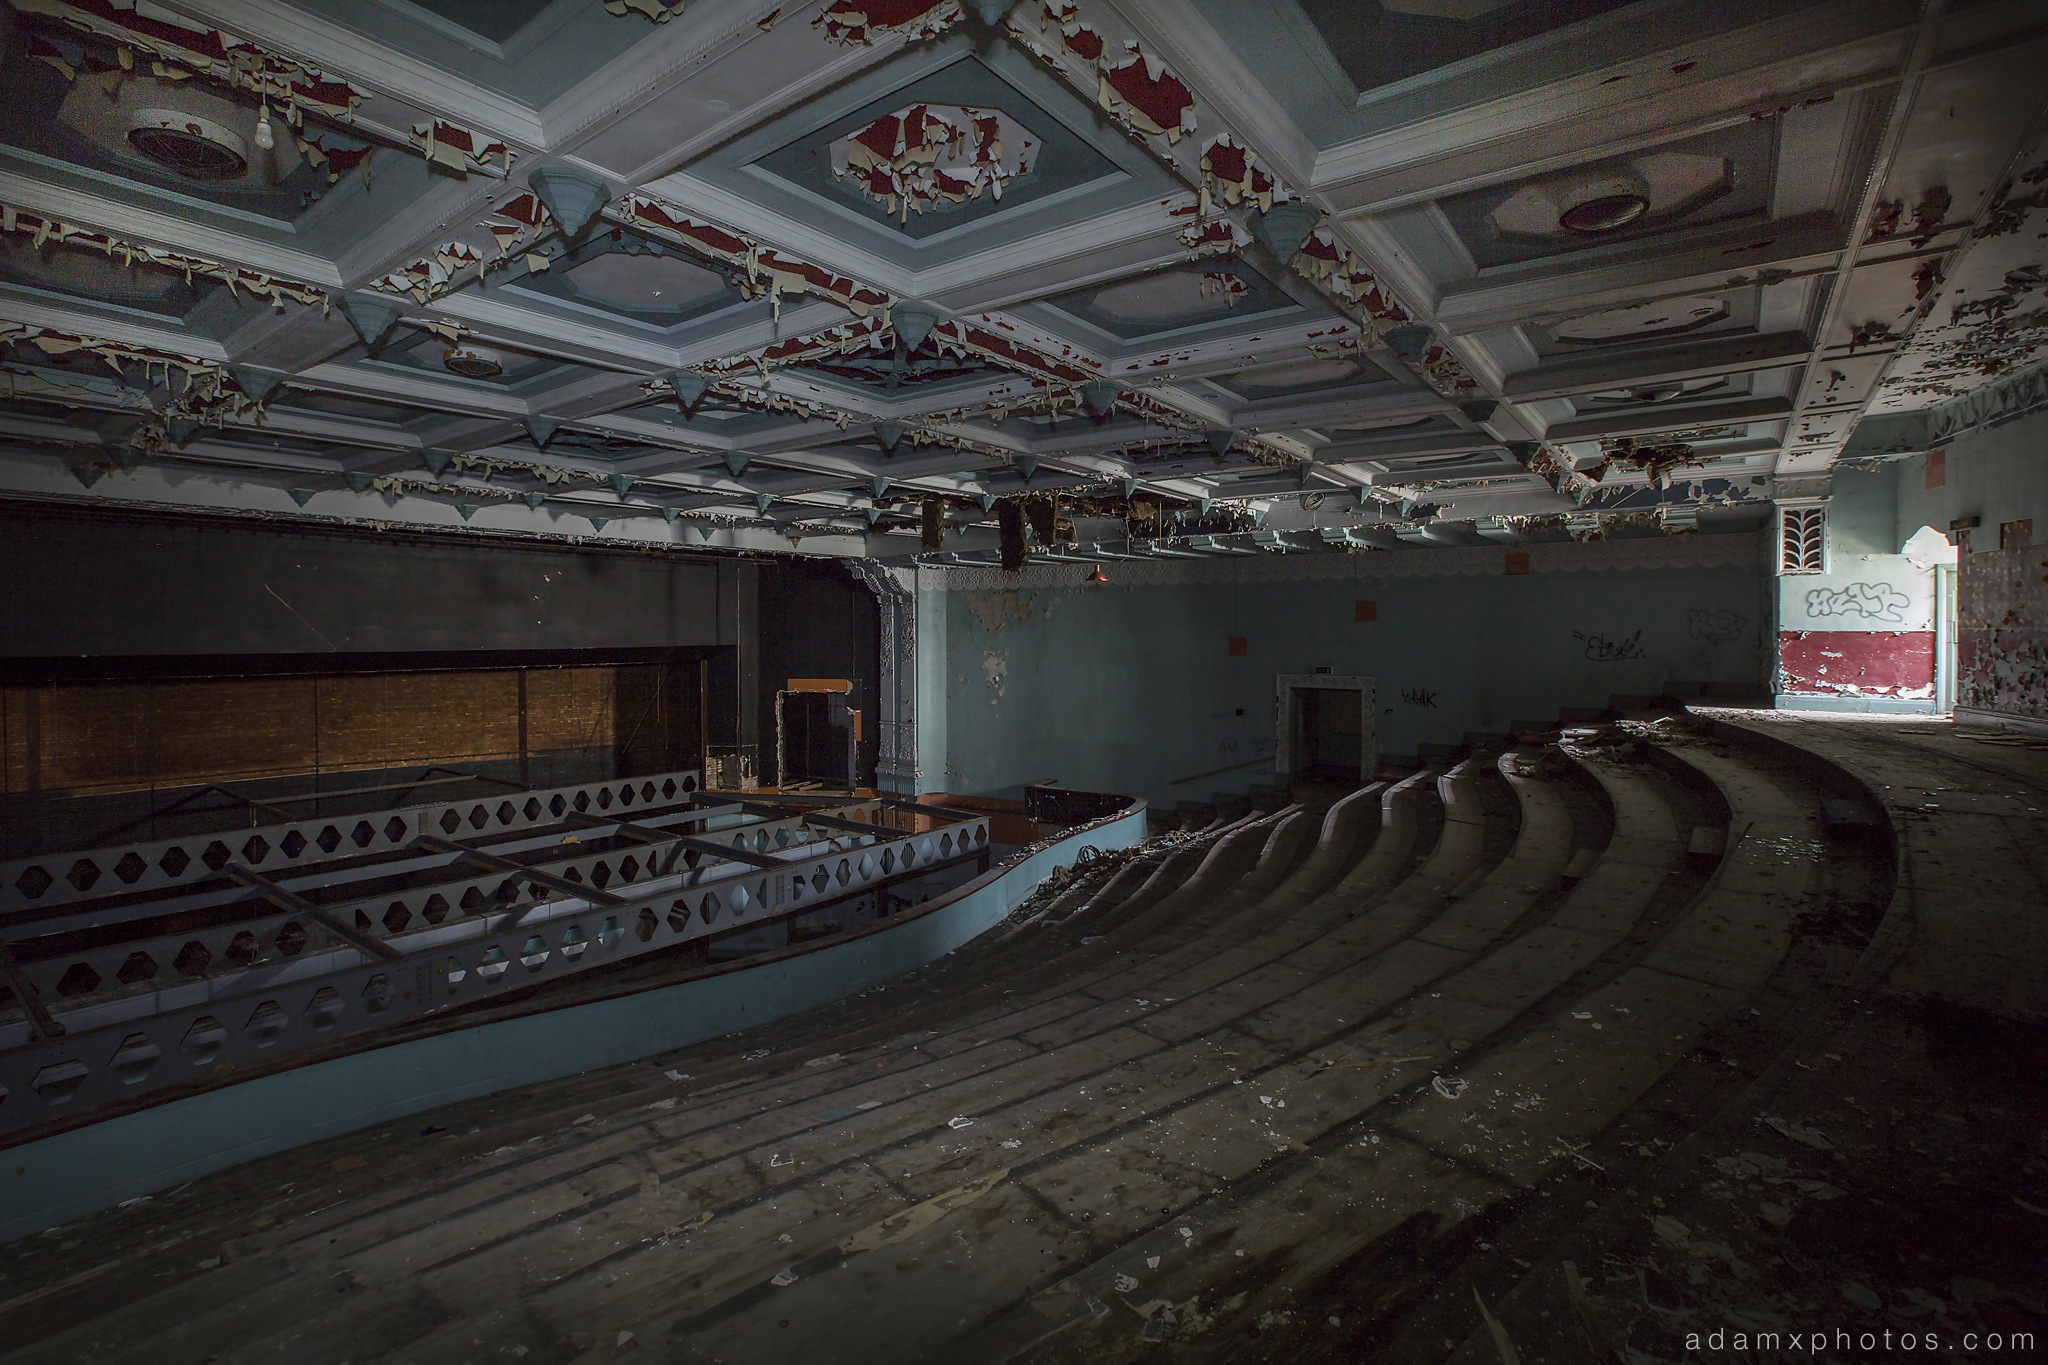 Colchester Odeon Cinema stage auditorium main hall Urbex Adam X Urban Exploration photo photos report decay detail UE abandoned derelict unused empty disused decay decayed decaying grimy grime